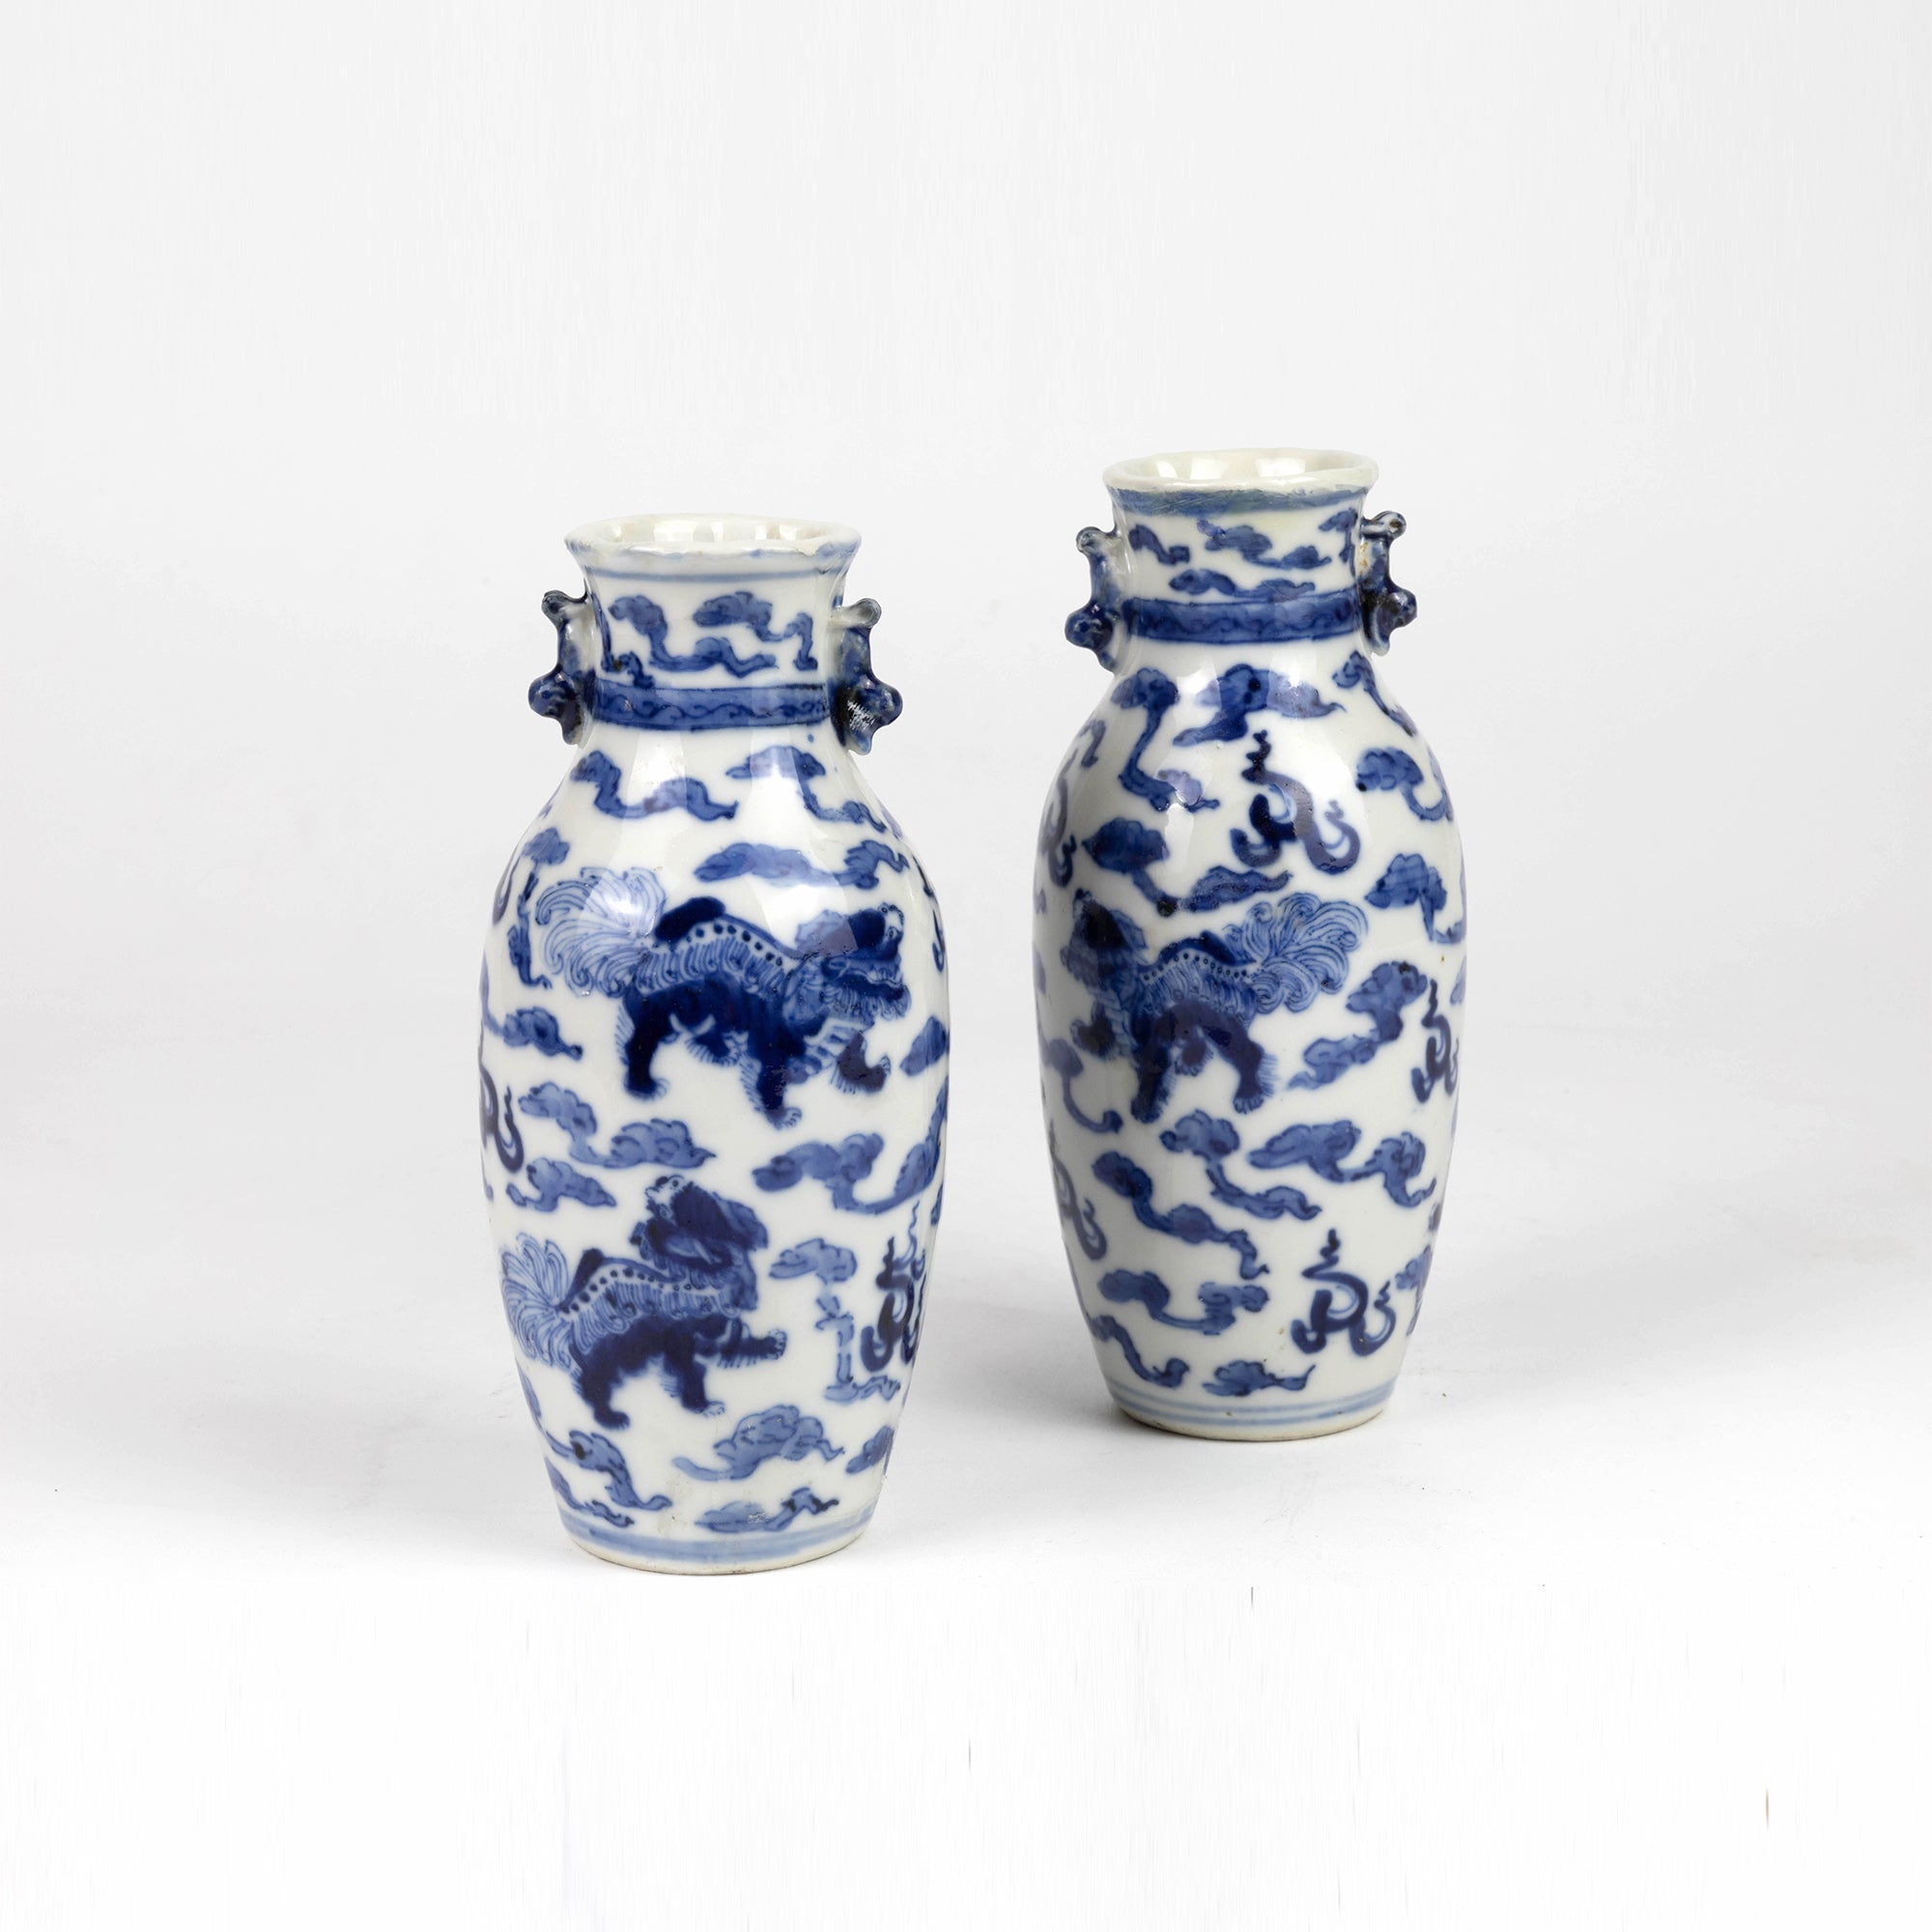 P1236 Pair Of Small Blue And White Vases